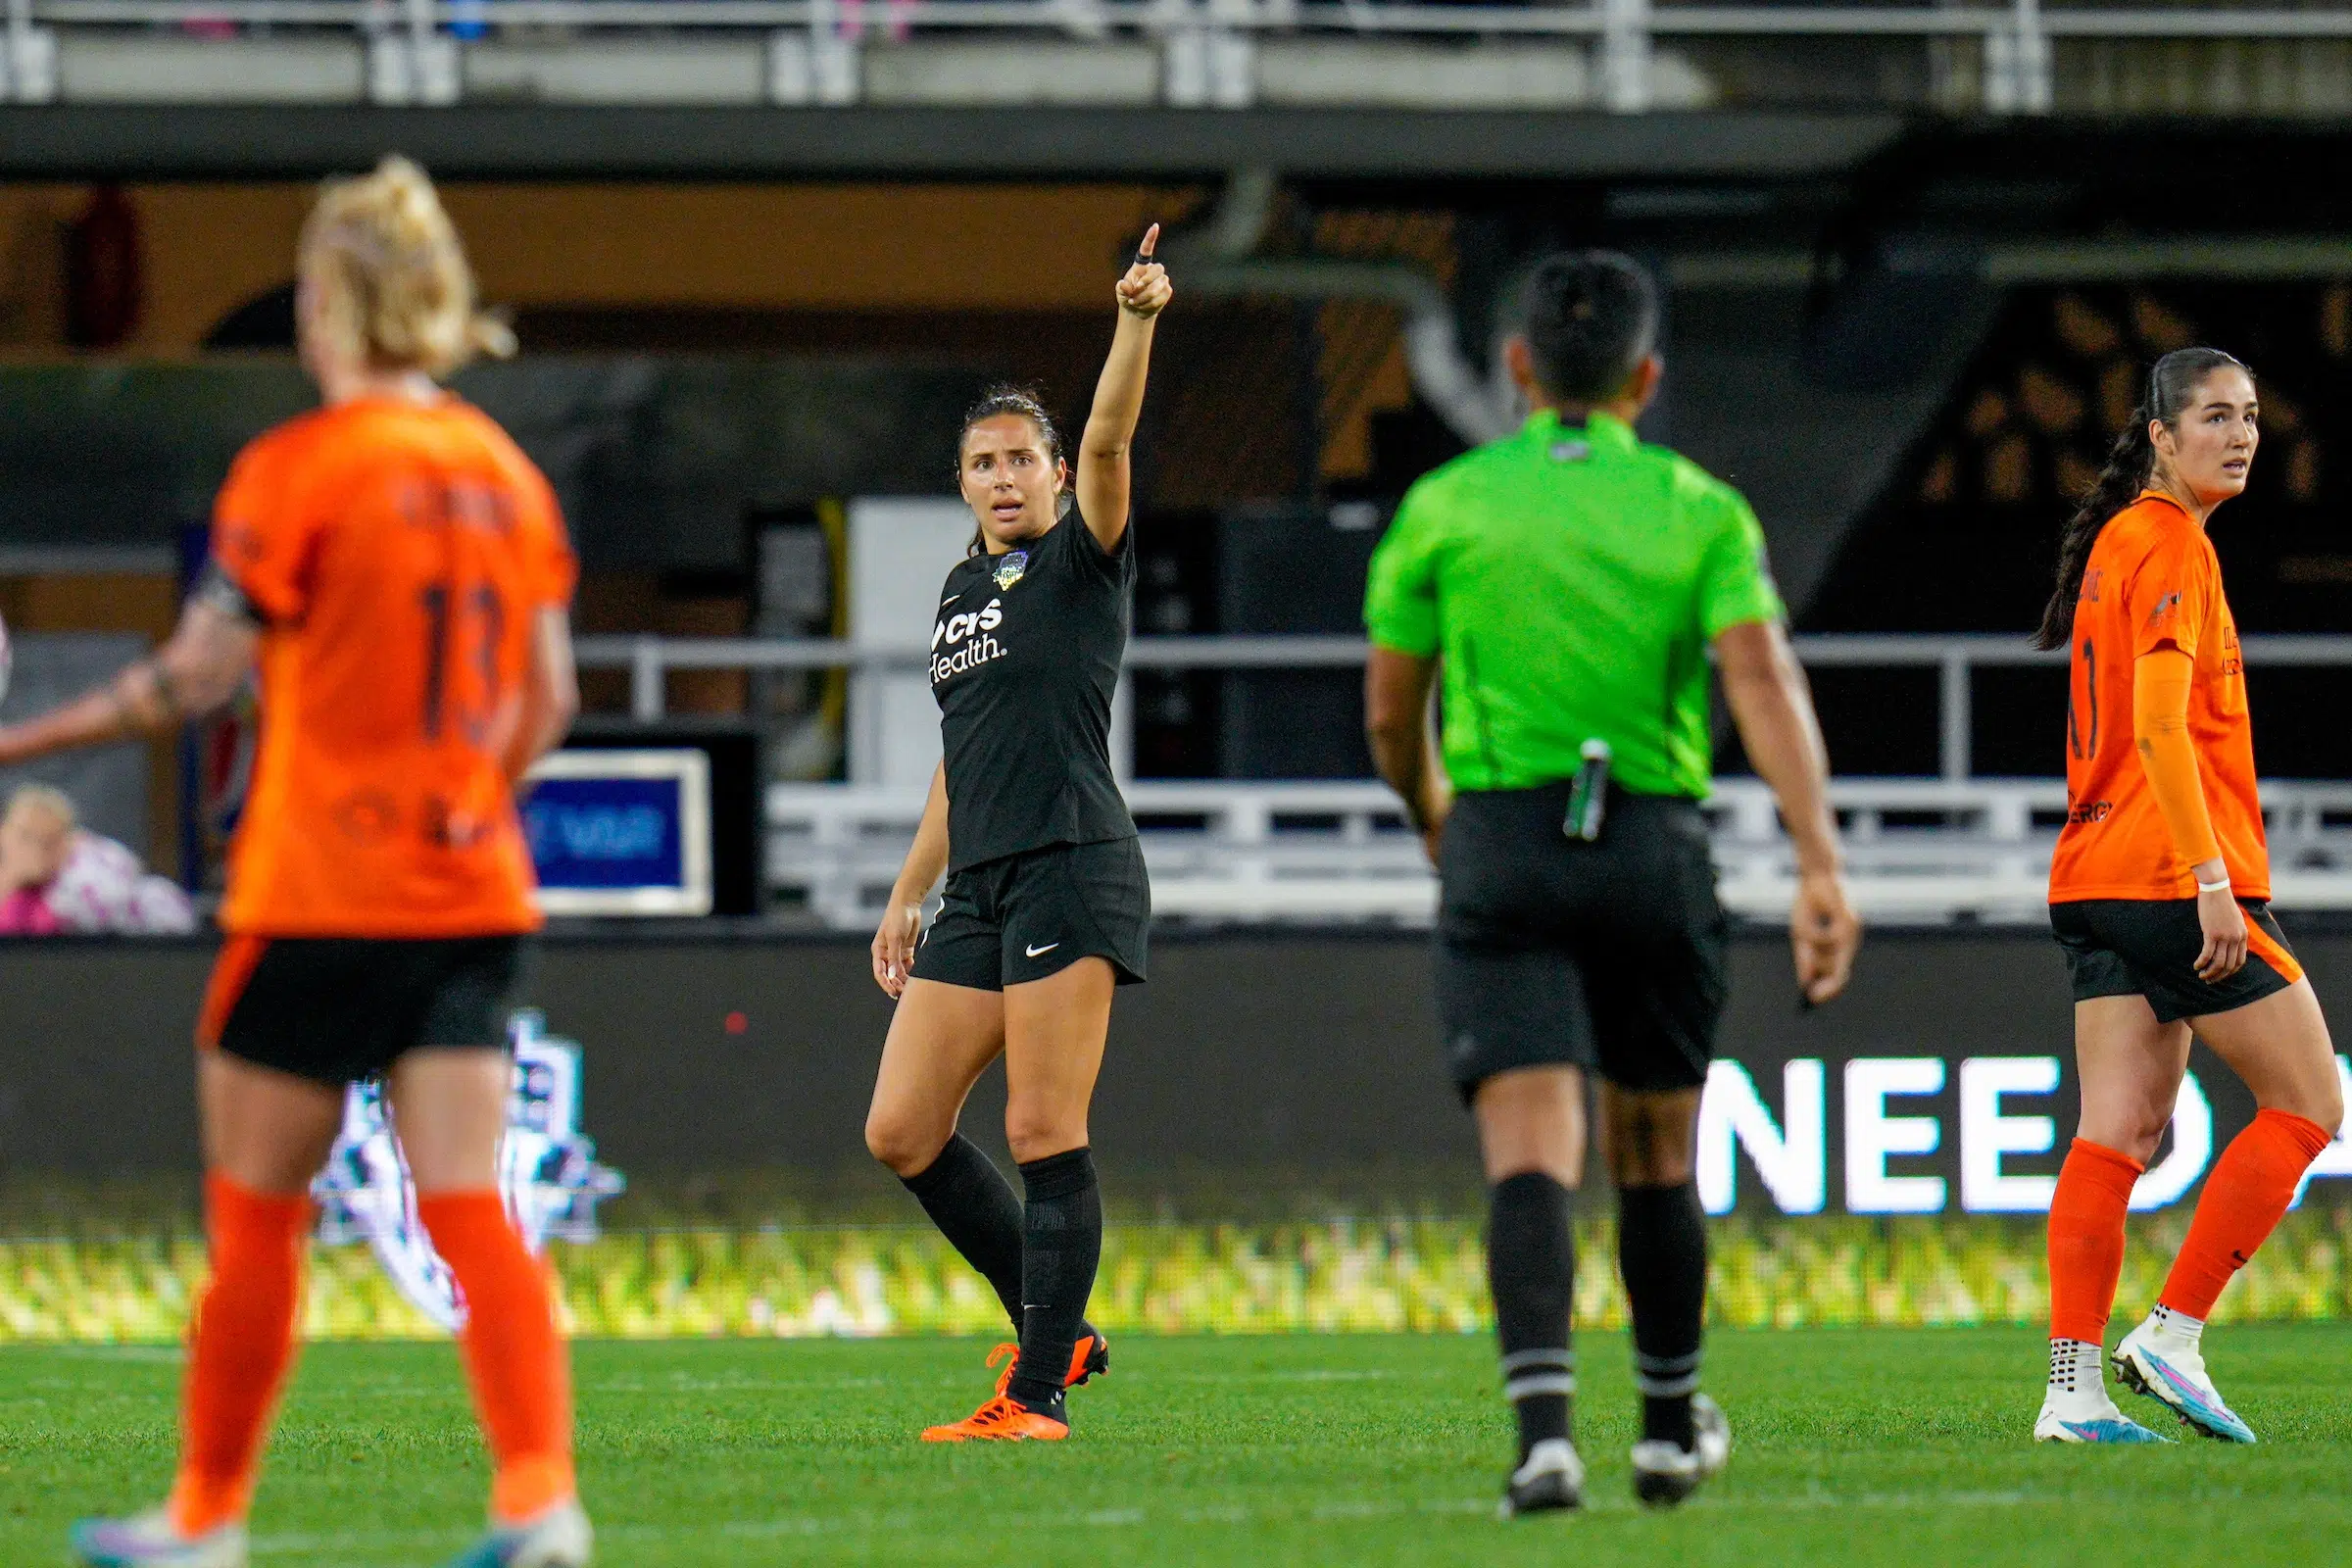 Sam Staab in an all black uniform points at a referee in a green shirt on a soccer field.